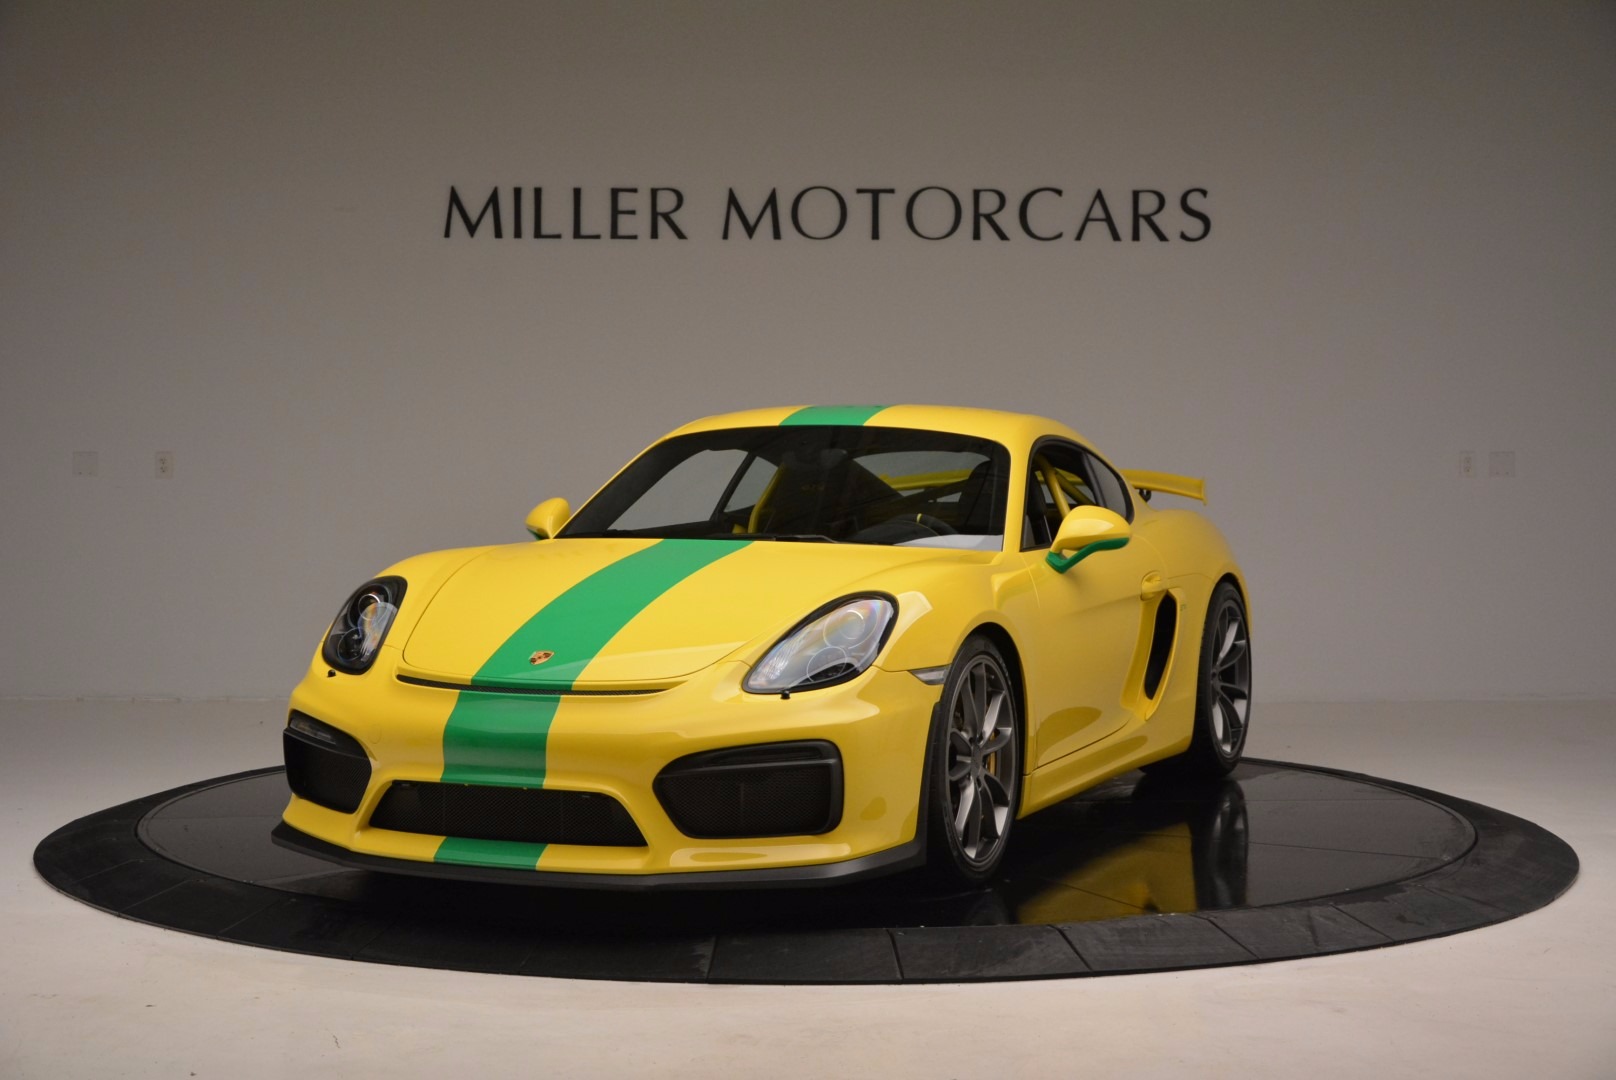 Used 2016 Porsche Cayman GT4 for sale Sold at Bugatti of Greenwich in Greenwich CT 06830 1